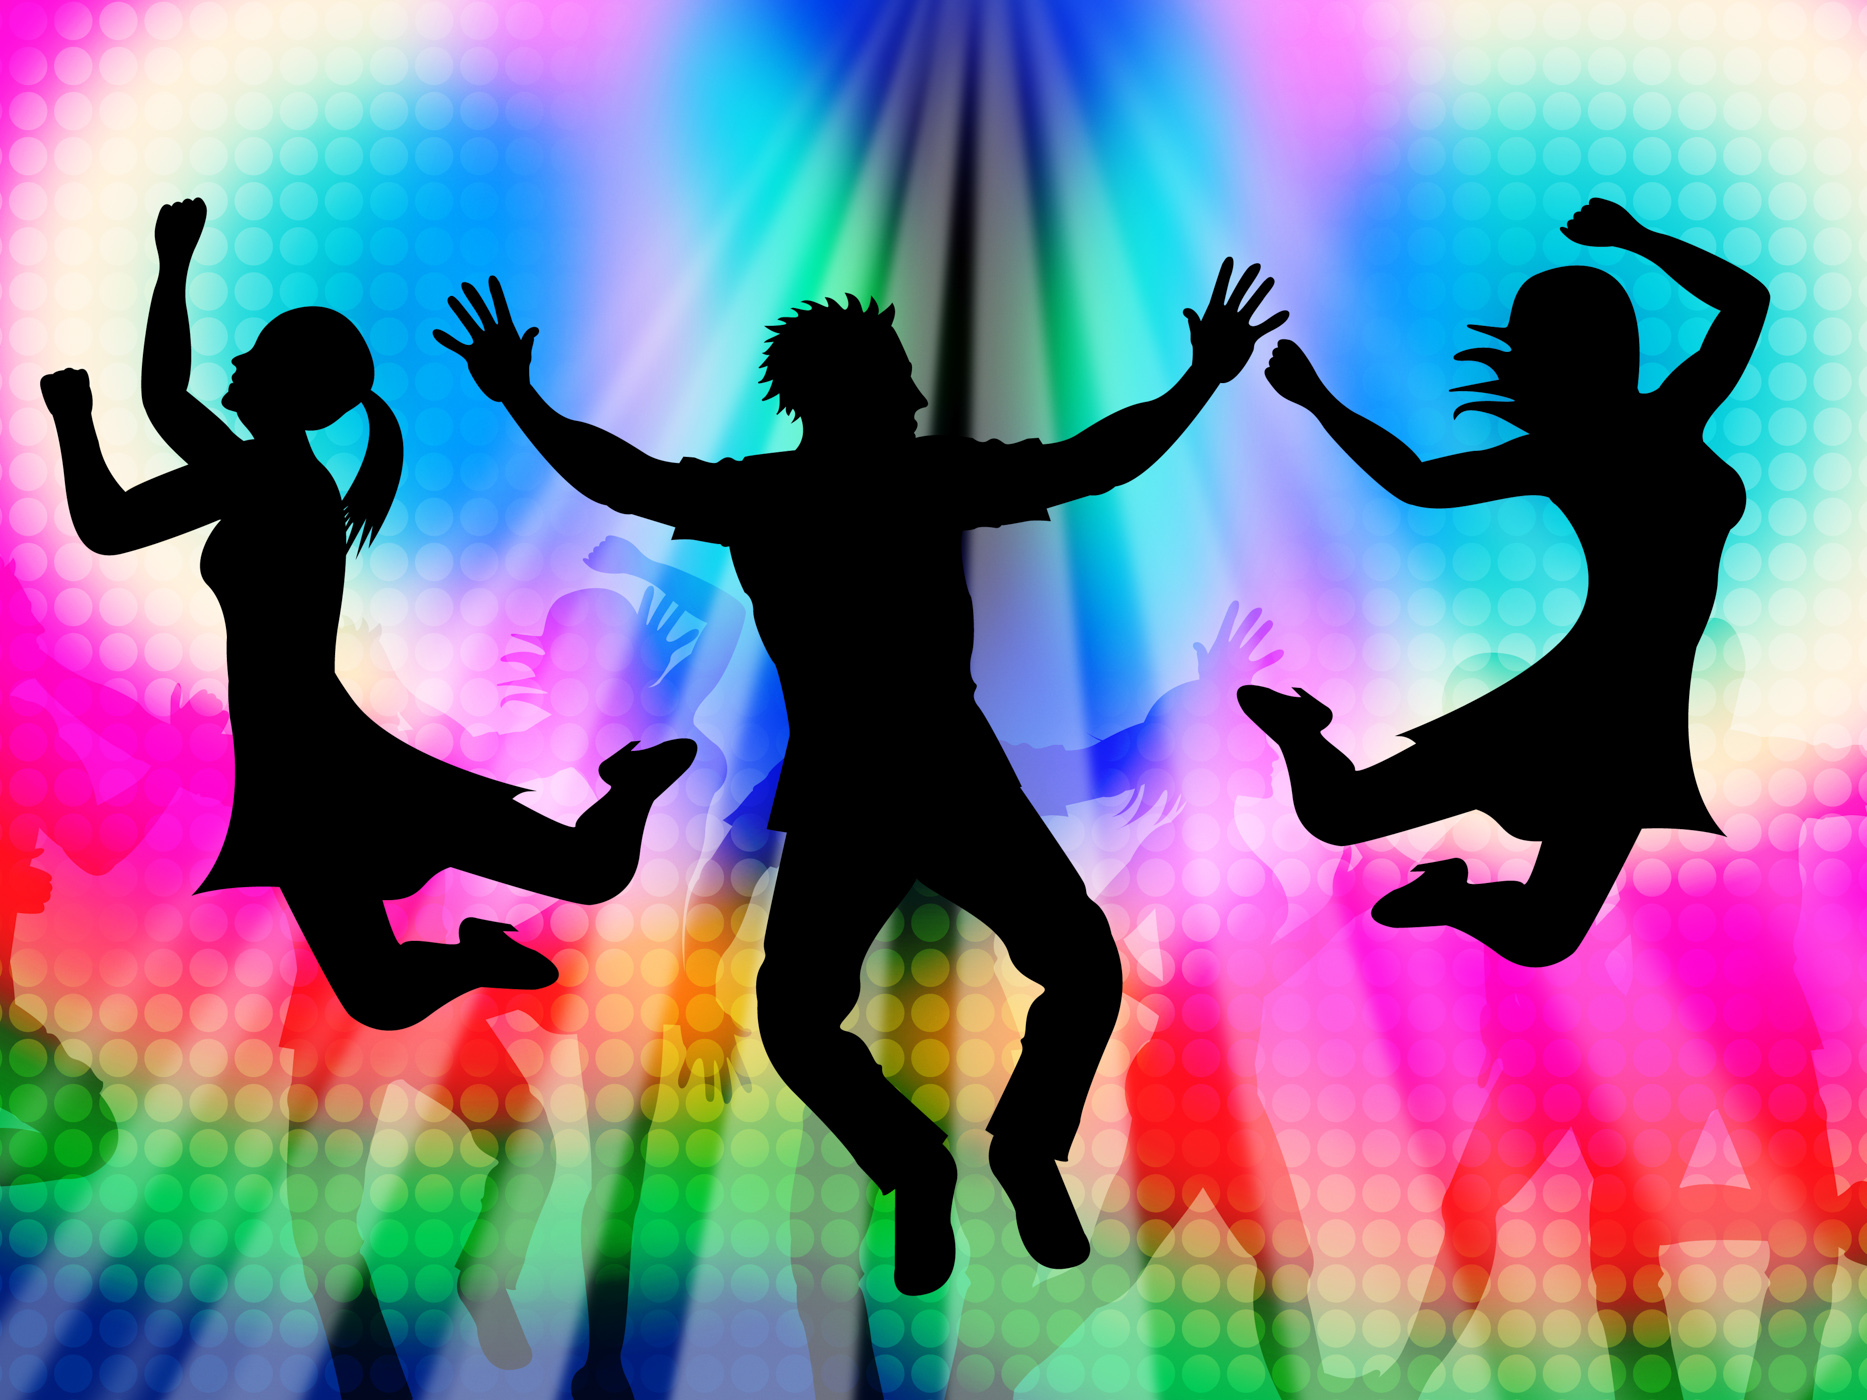 Excitement jumping represents disco dancing and activity photo